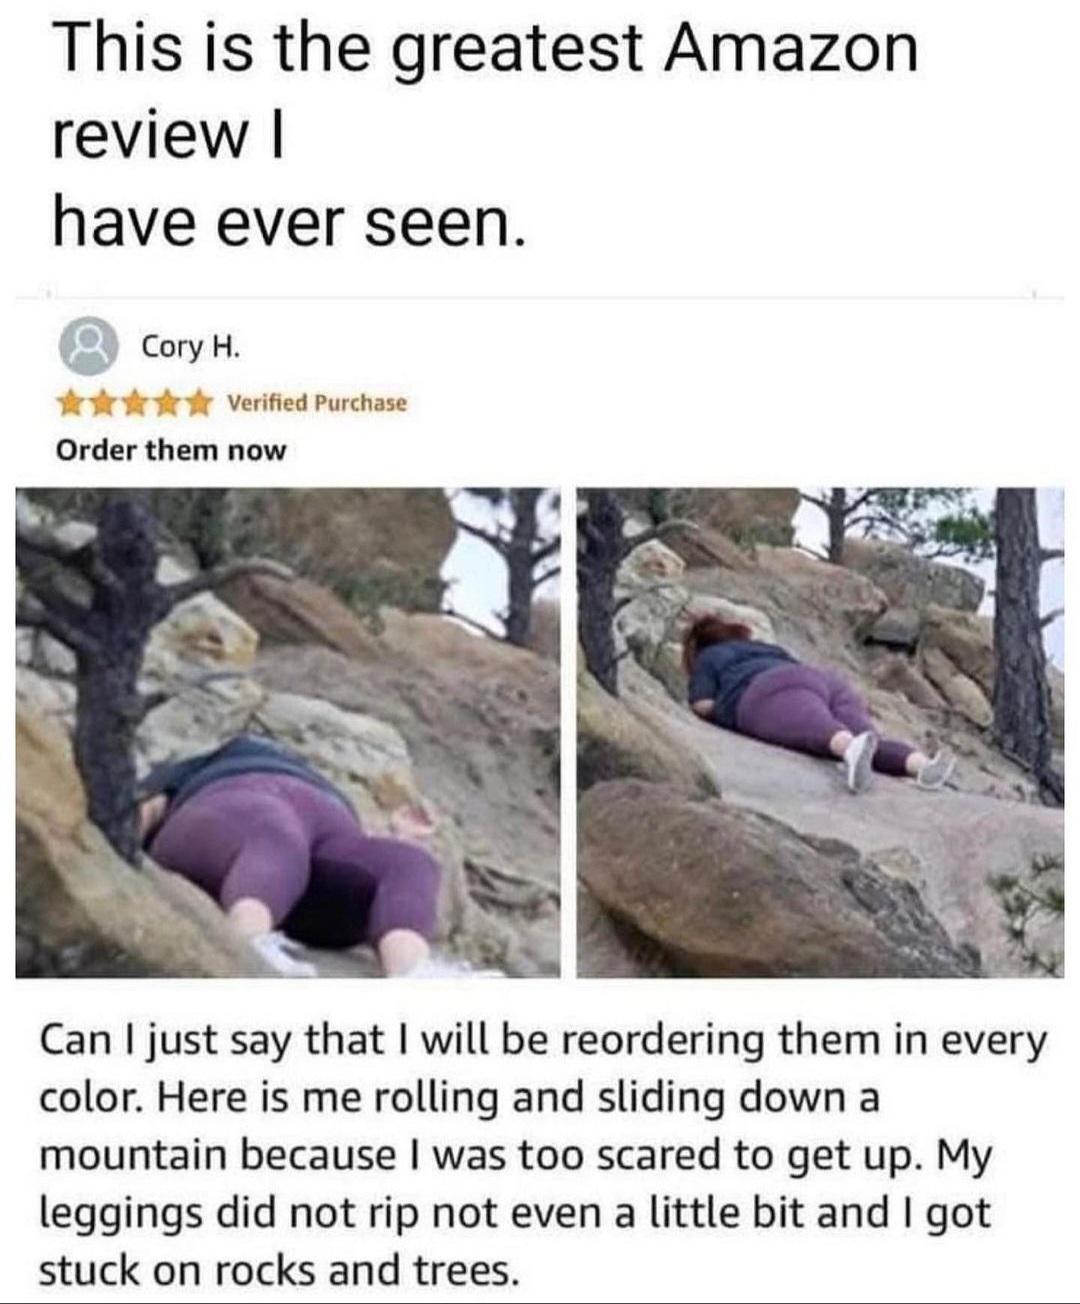 relatable memes - Meme - This is the greatest Amazon review I have ever seen. Cory H. Verified Purchase Order them now Can I just say that I will be reordering them in every color. Here is me rolling and sliding down a mountain because I was too scared to